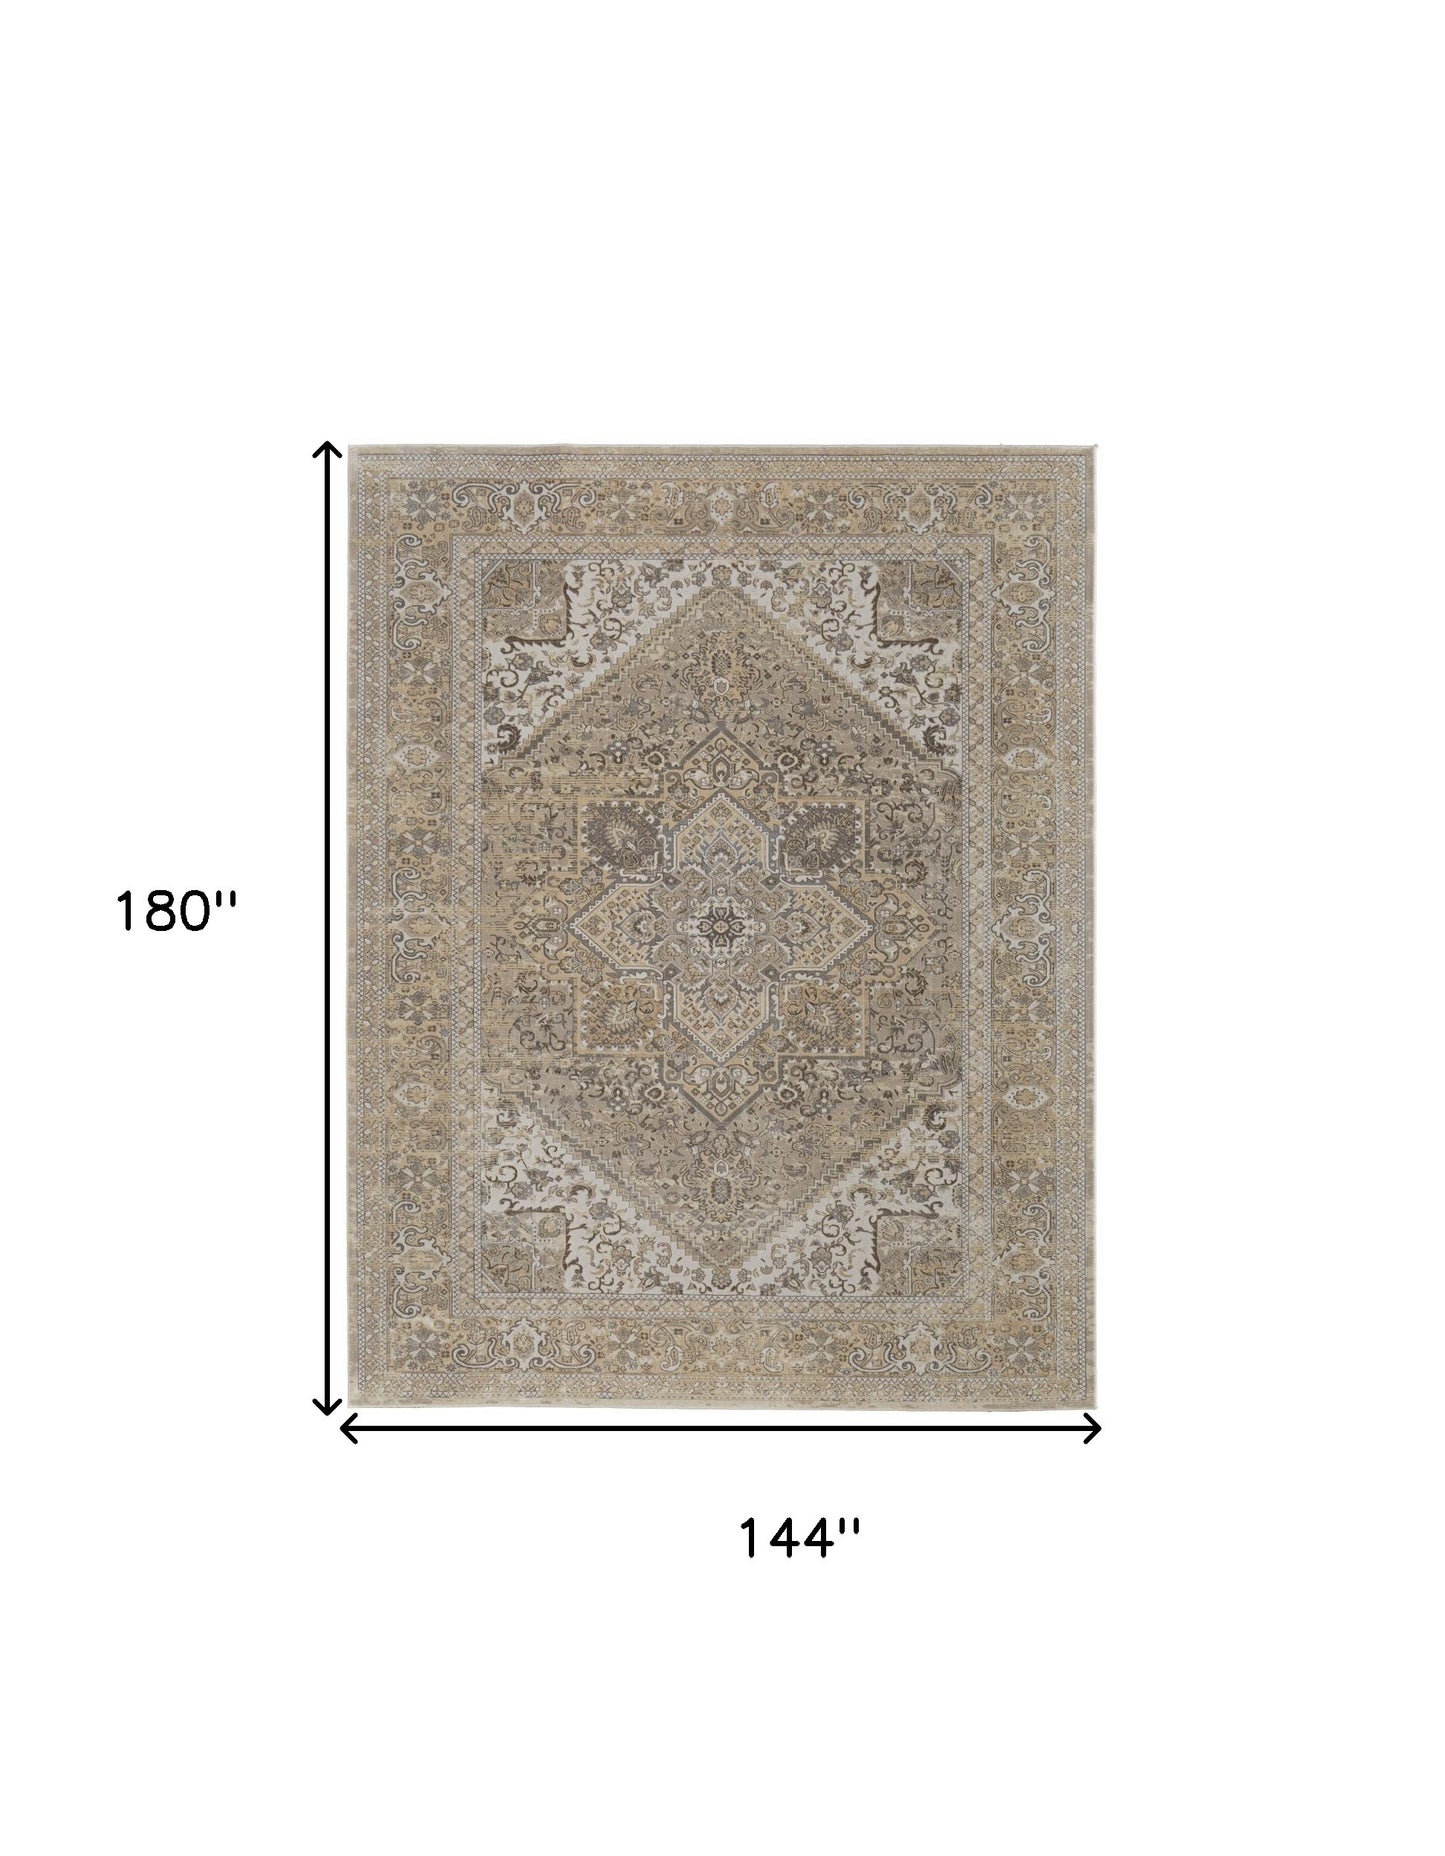 8' X 10' Brown Ivory And Tan Floral Power Loom Distressed Area Rug